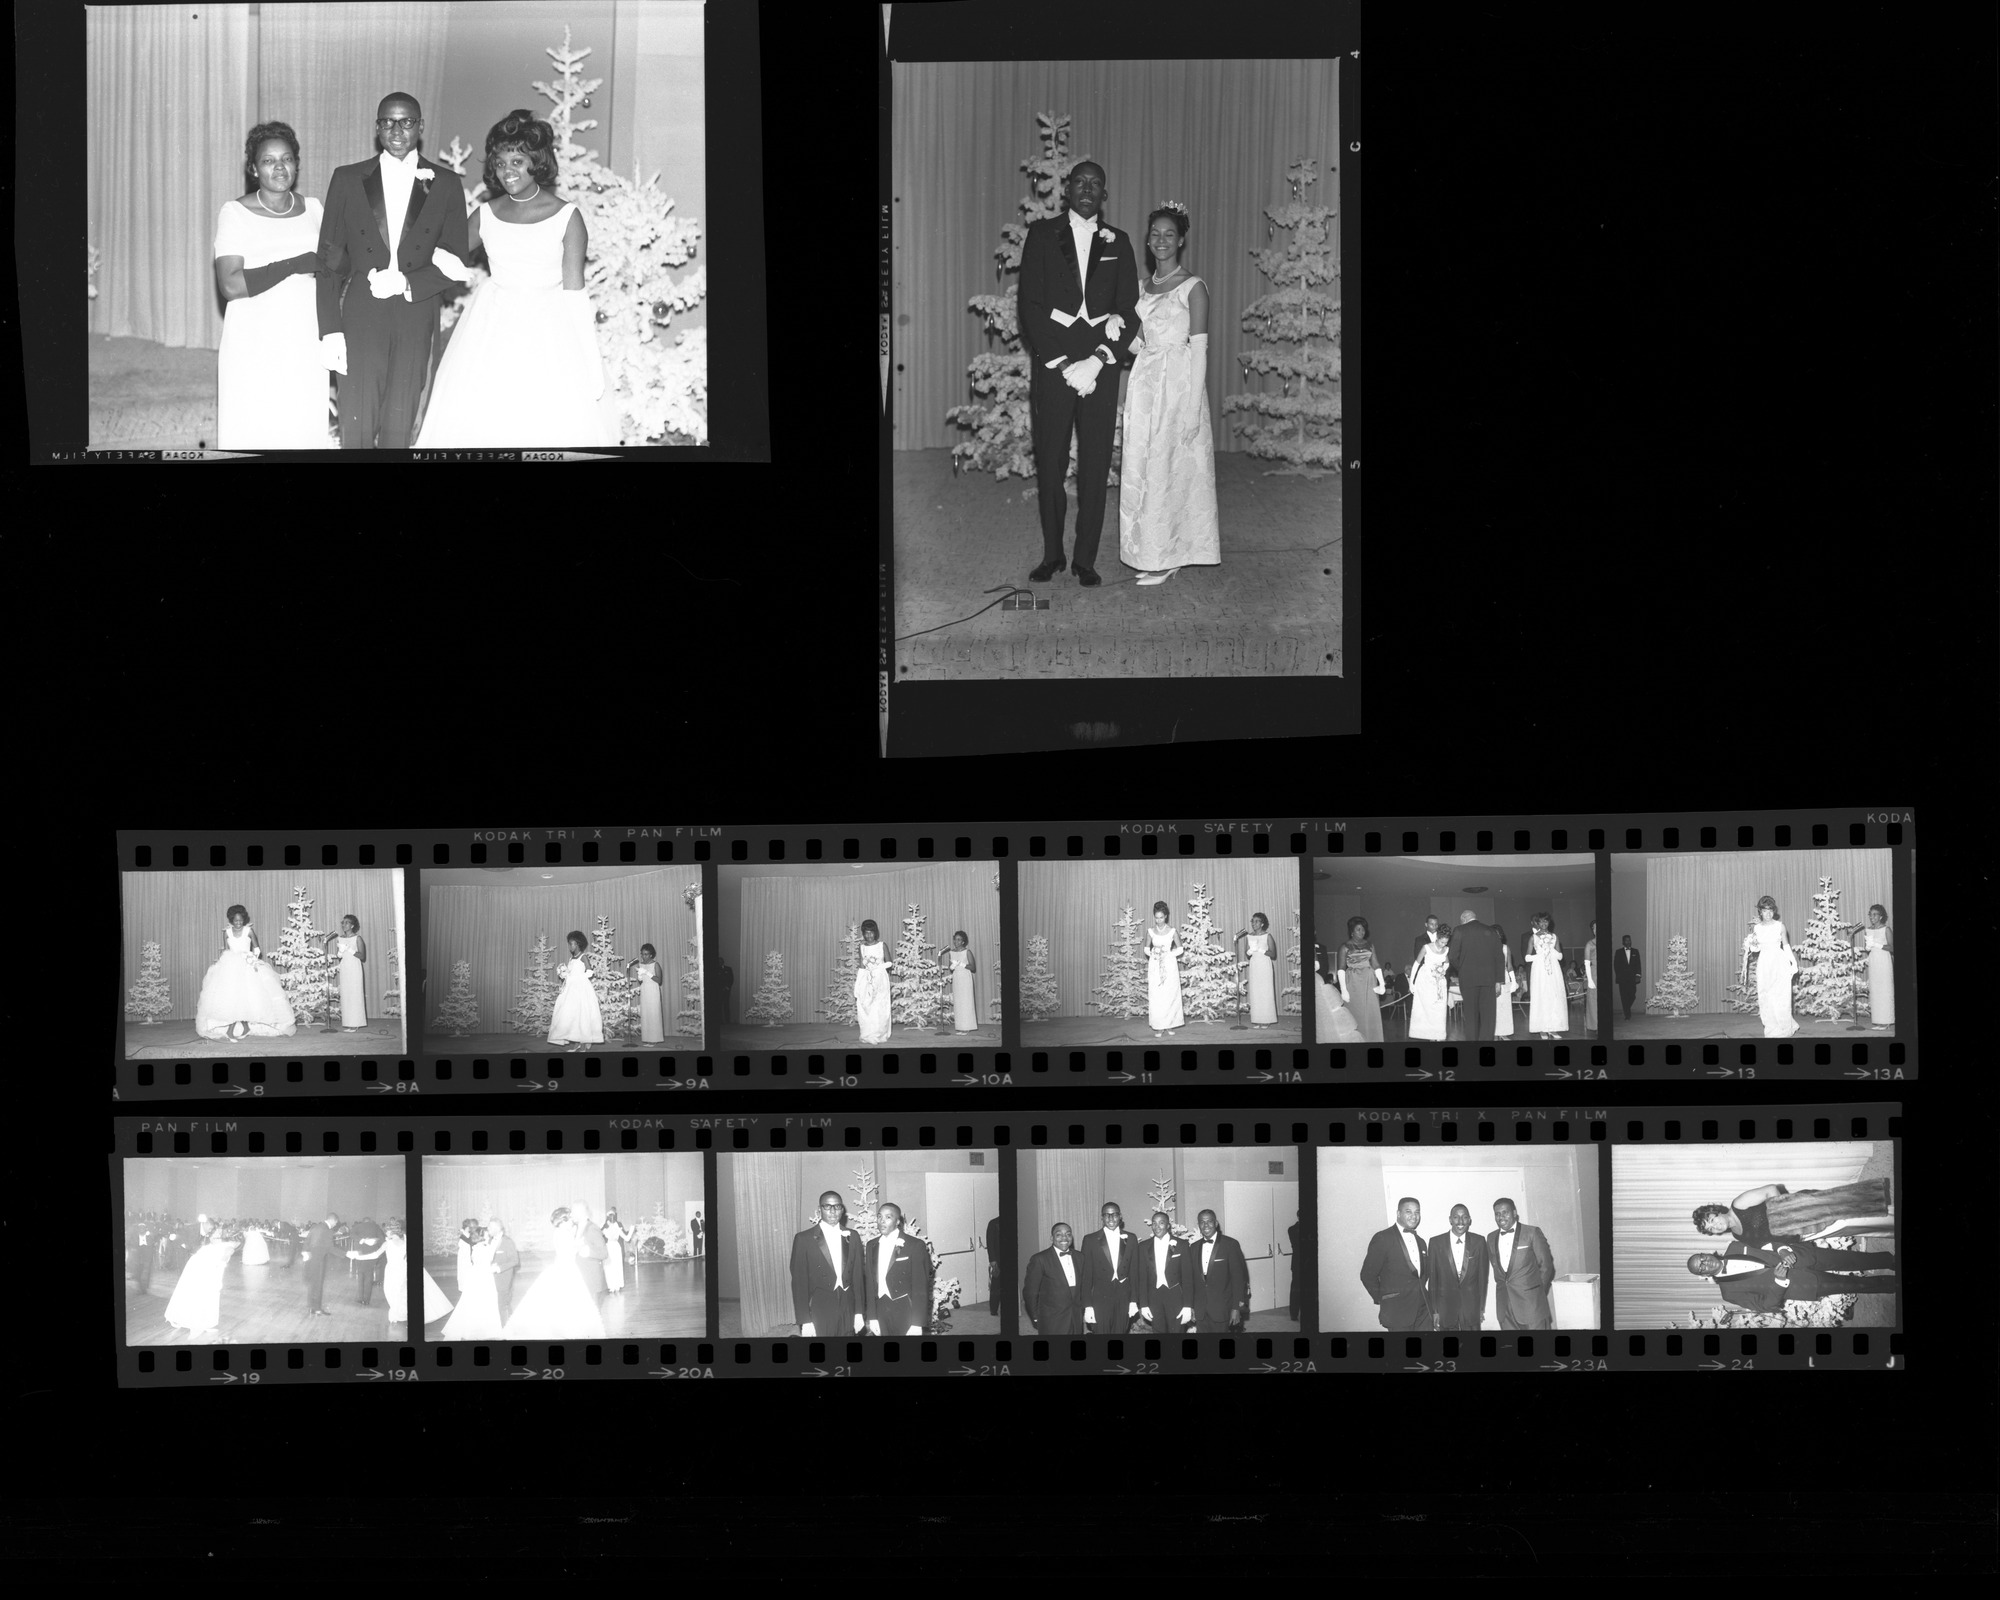 Set of negatives by Clinton Wright of Debutante Ball, 1964